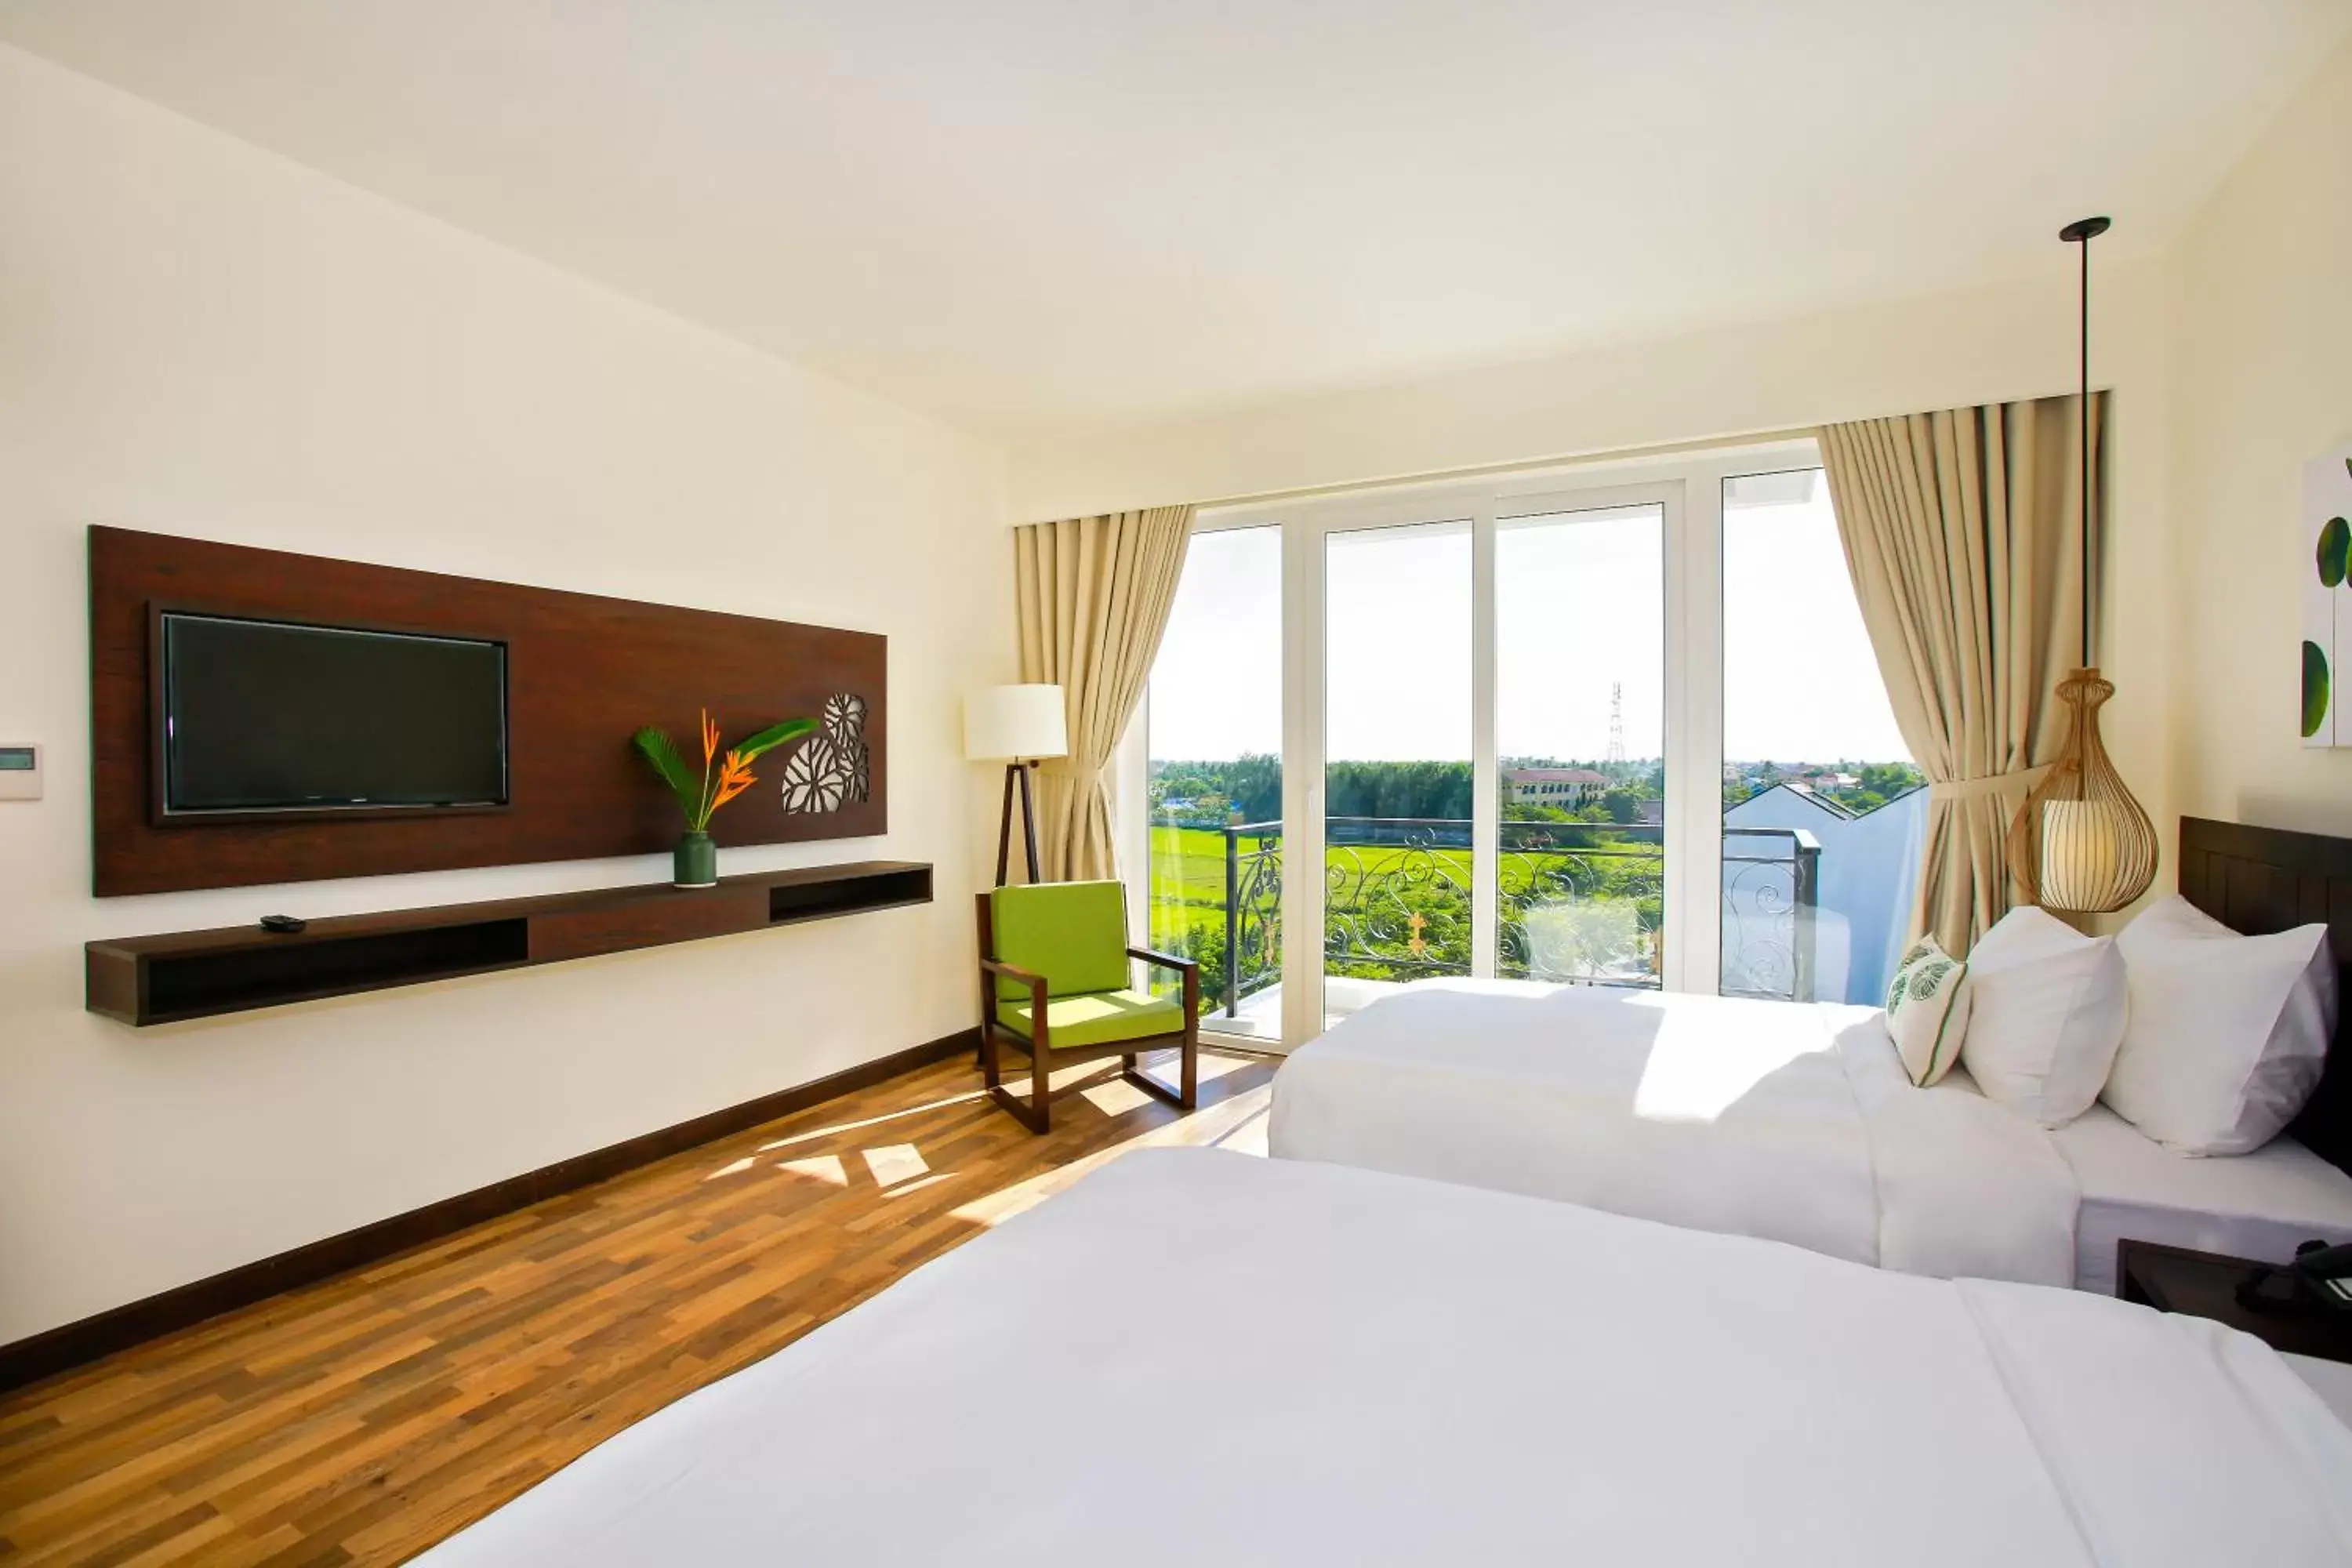 Deluxe Triple Room with Balcony in Lasenta Boutique Hotel Hoian